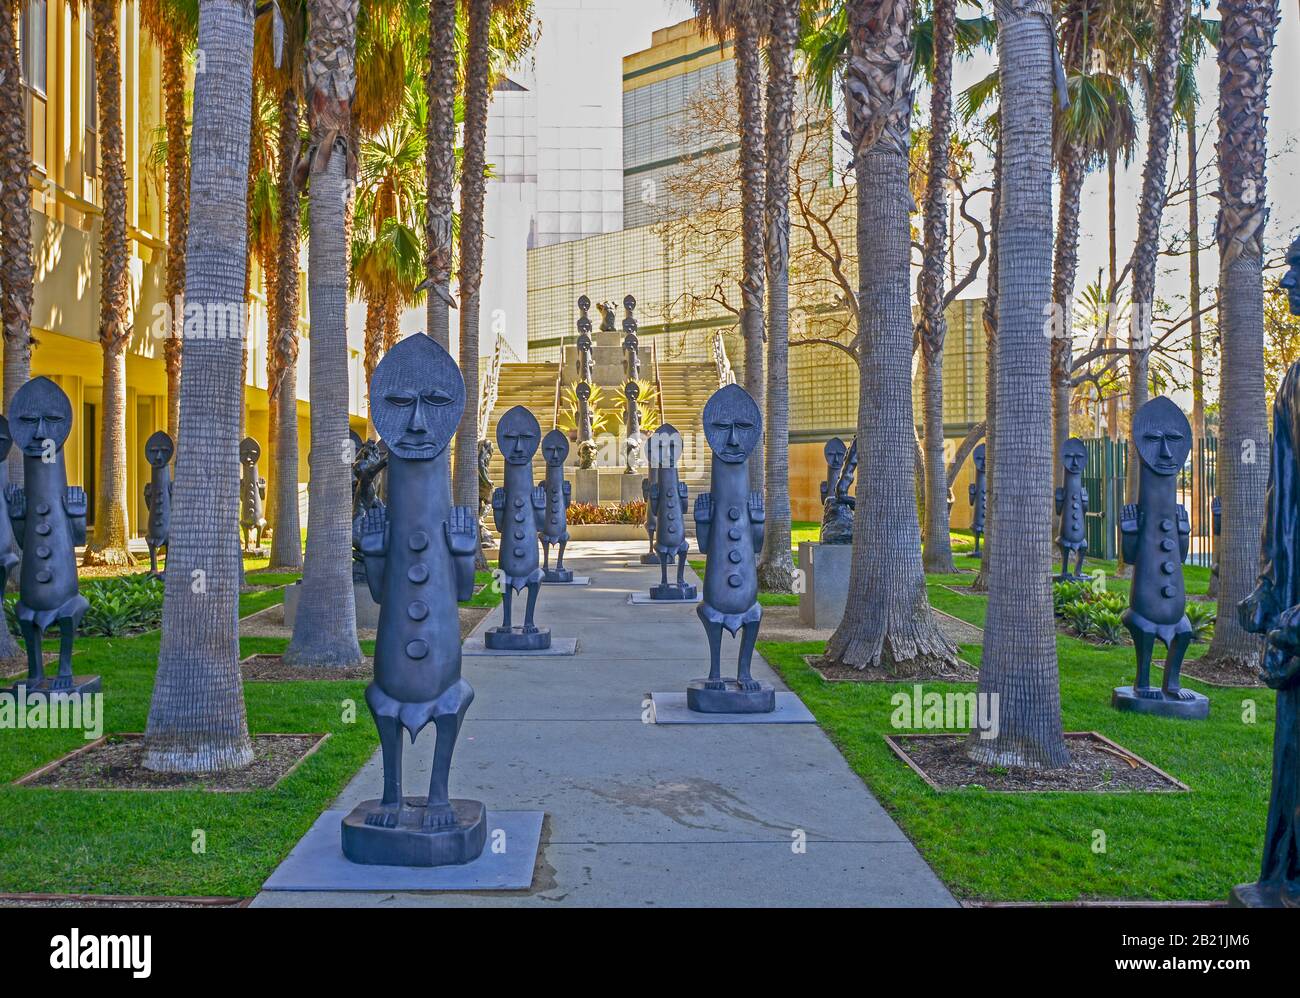 LACMA. The Invisible Man and the Masque of Blackness, B. Gerald Cantor Sculpture Garden presso il Los Angeles County Museum of Art, Los Angeles, Foto Stock